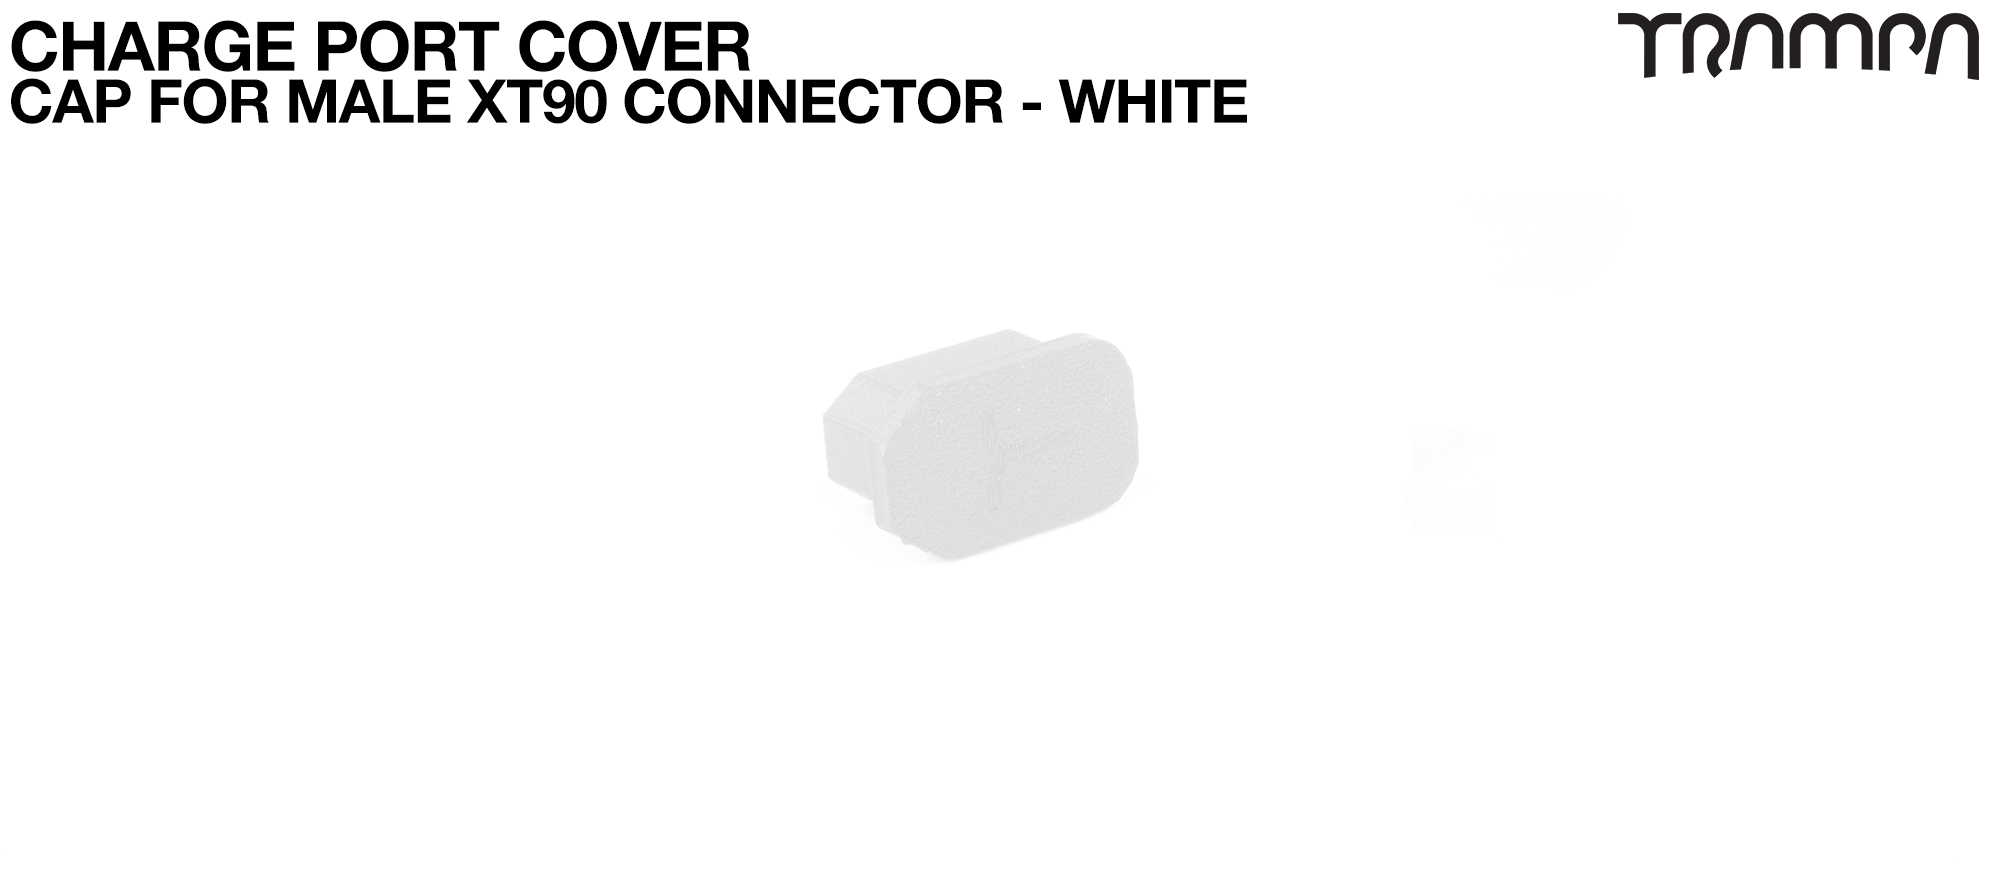 Charge Port Cover - CAP for Male XT90 Connector WHITE